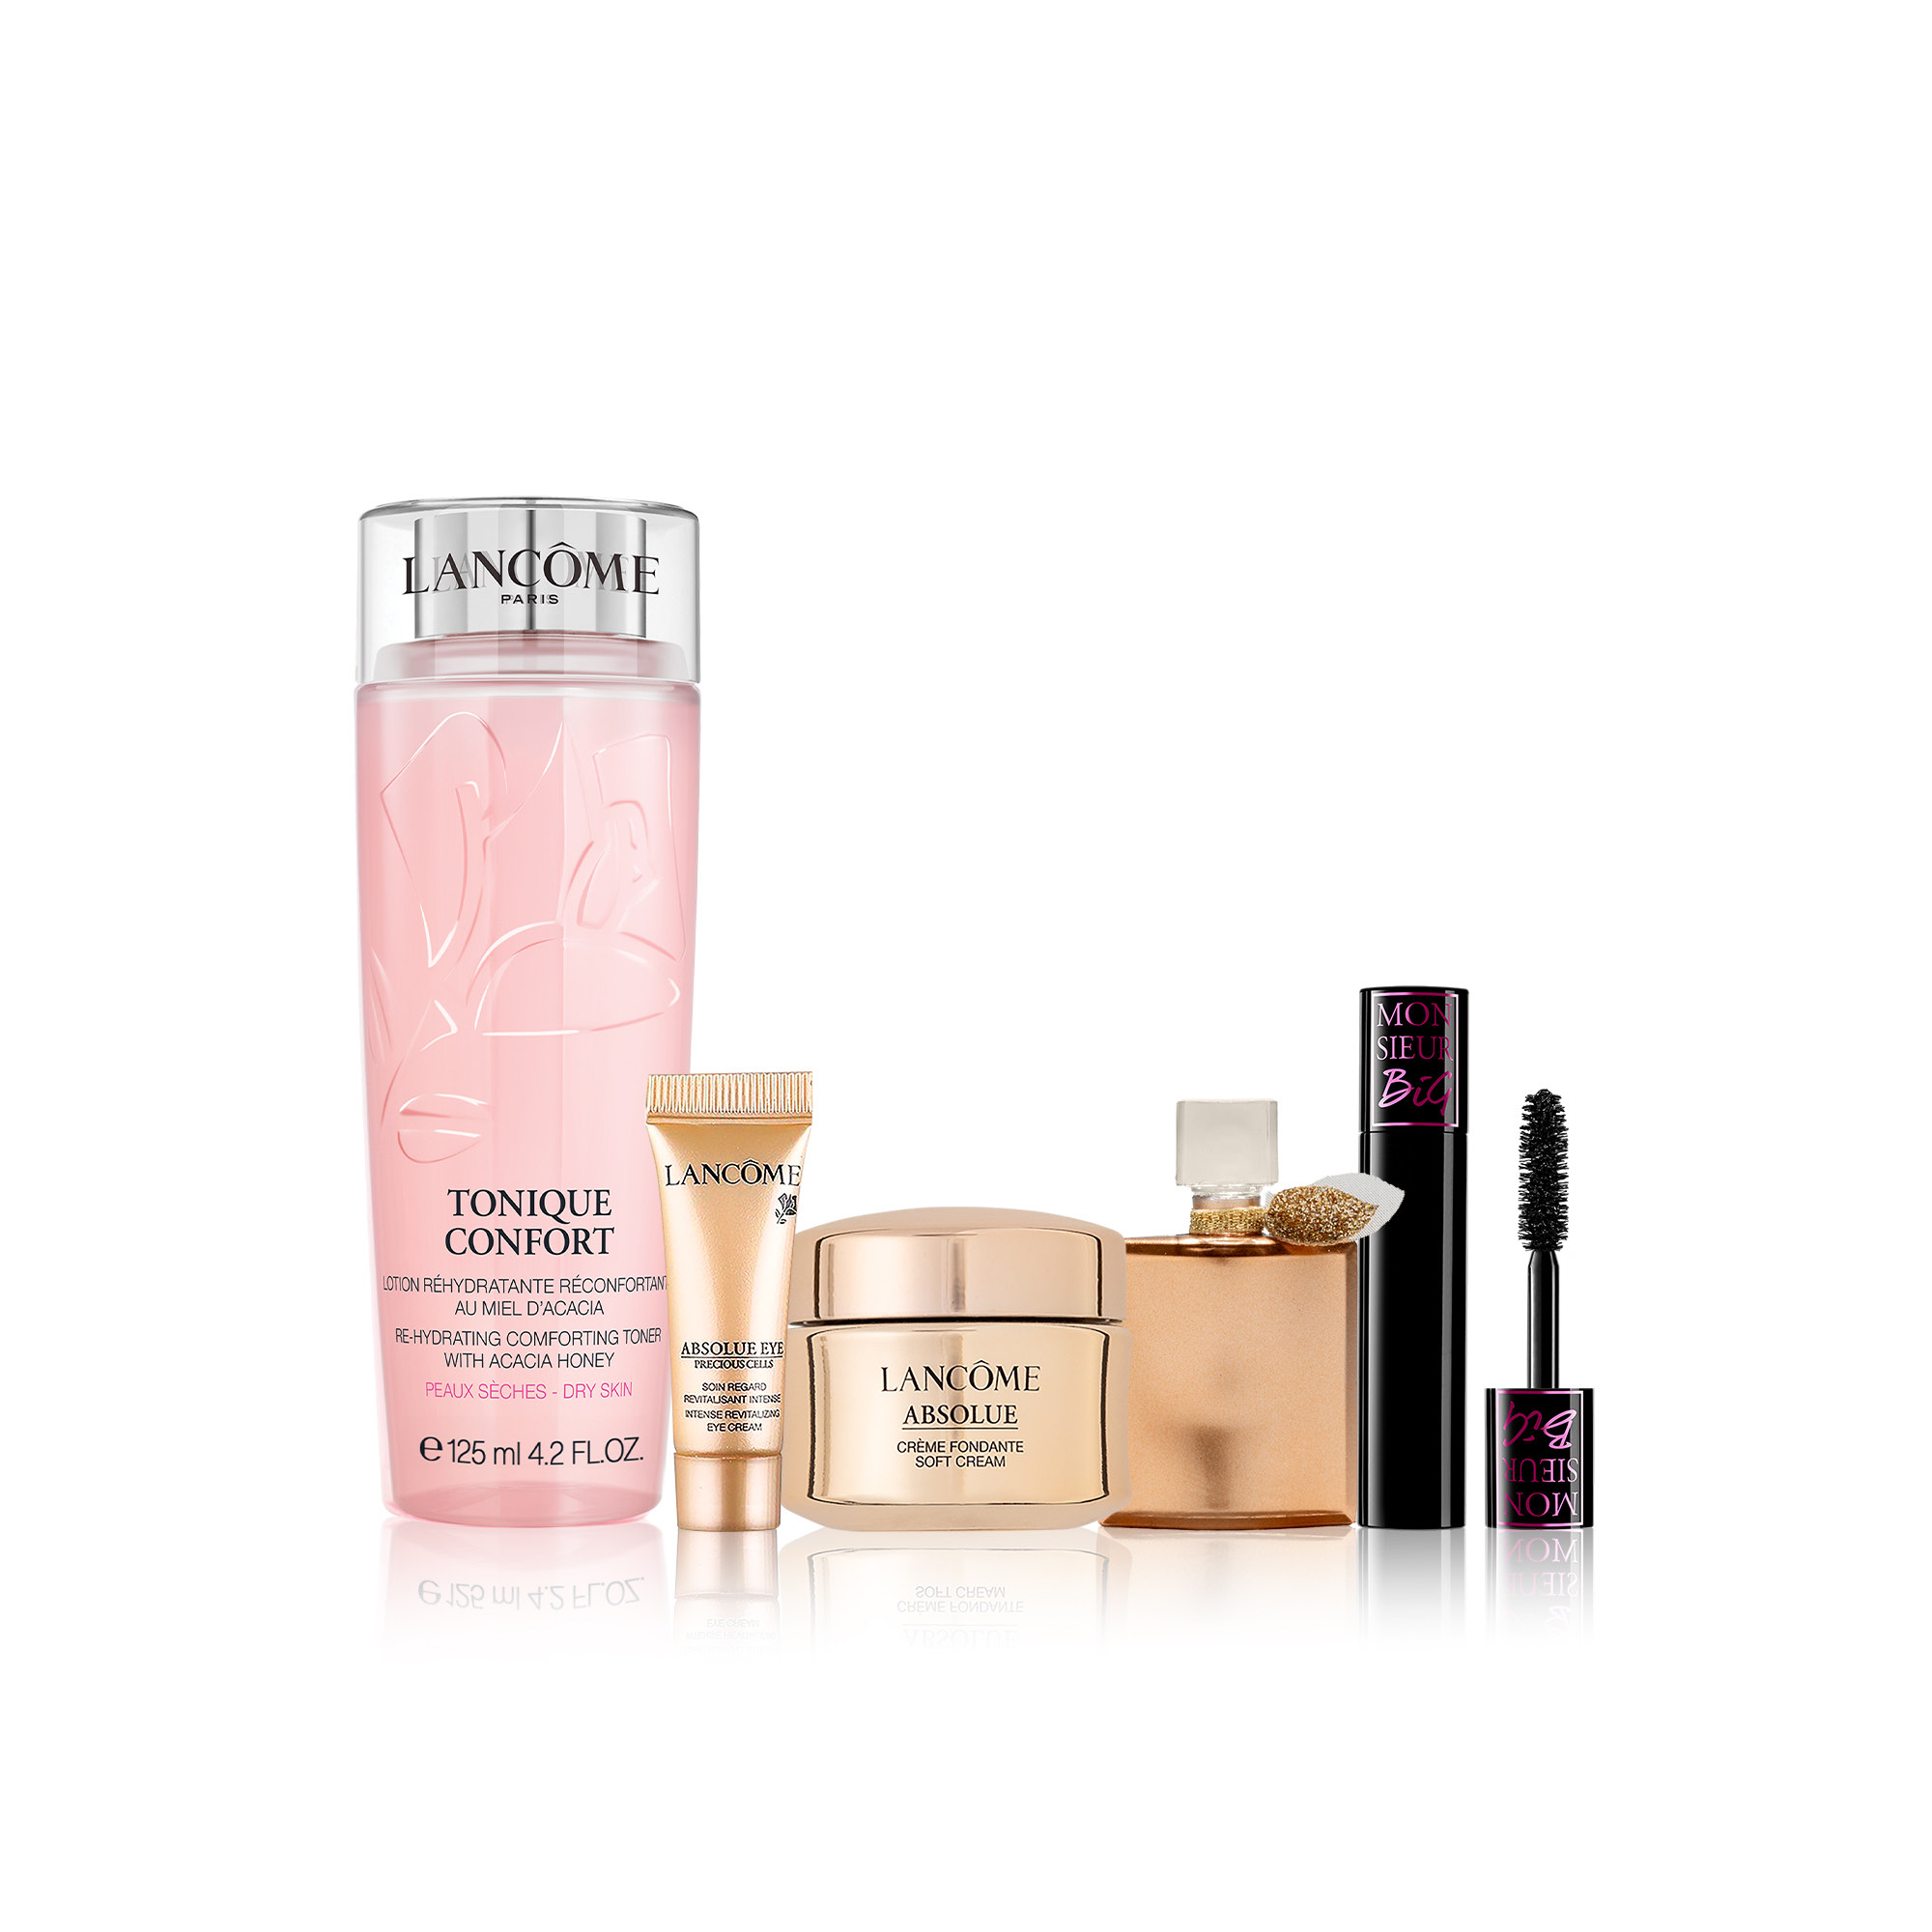 Gift available when you purchase two or more Lancôme products in the same transaction, one to be skincare.